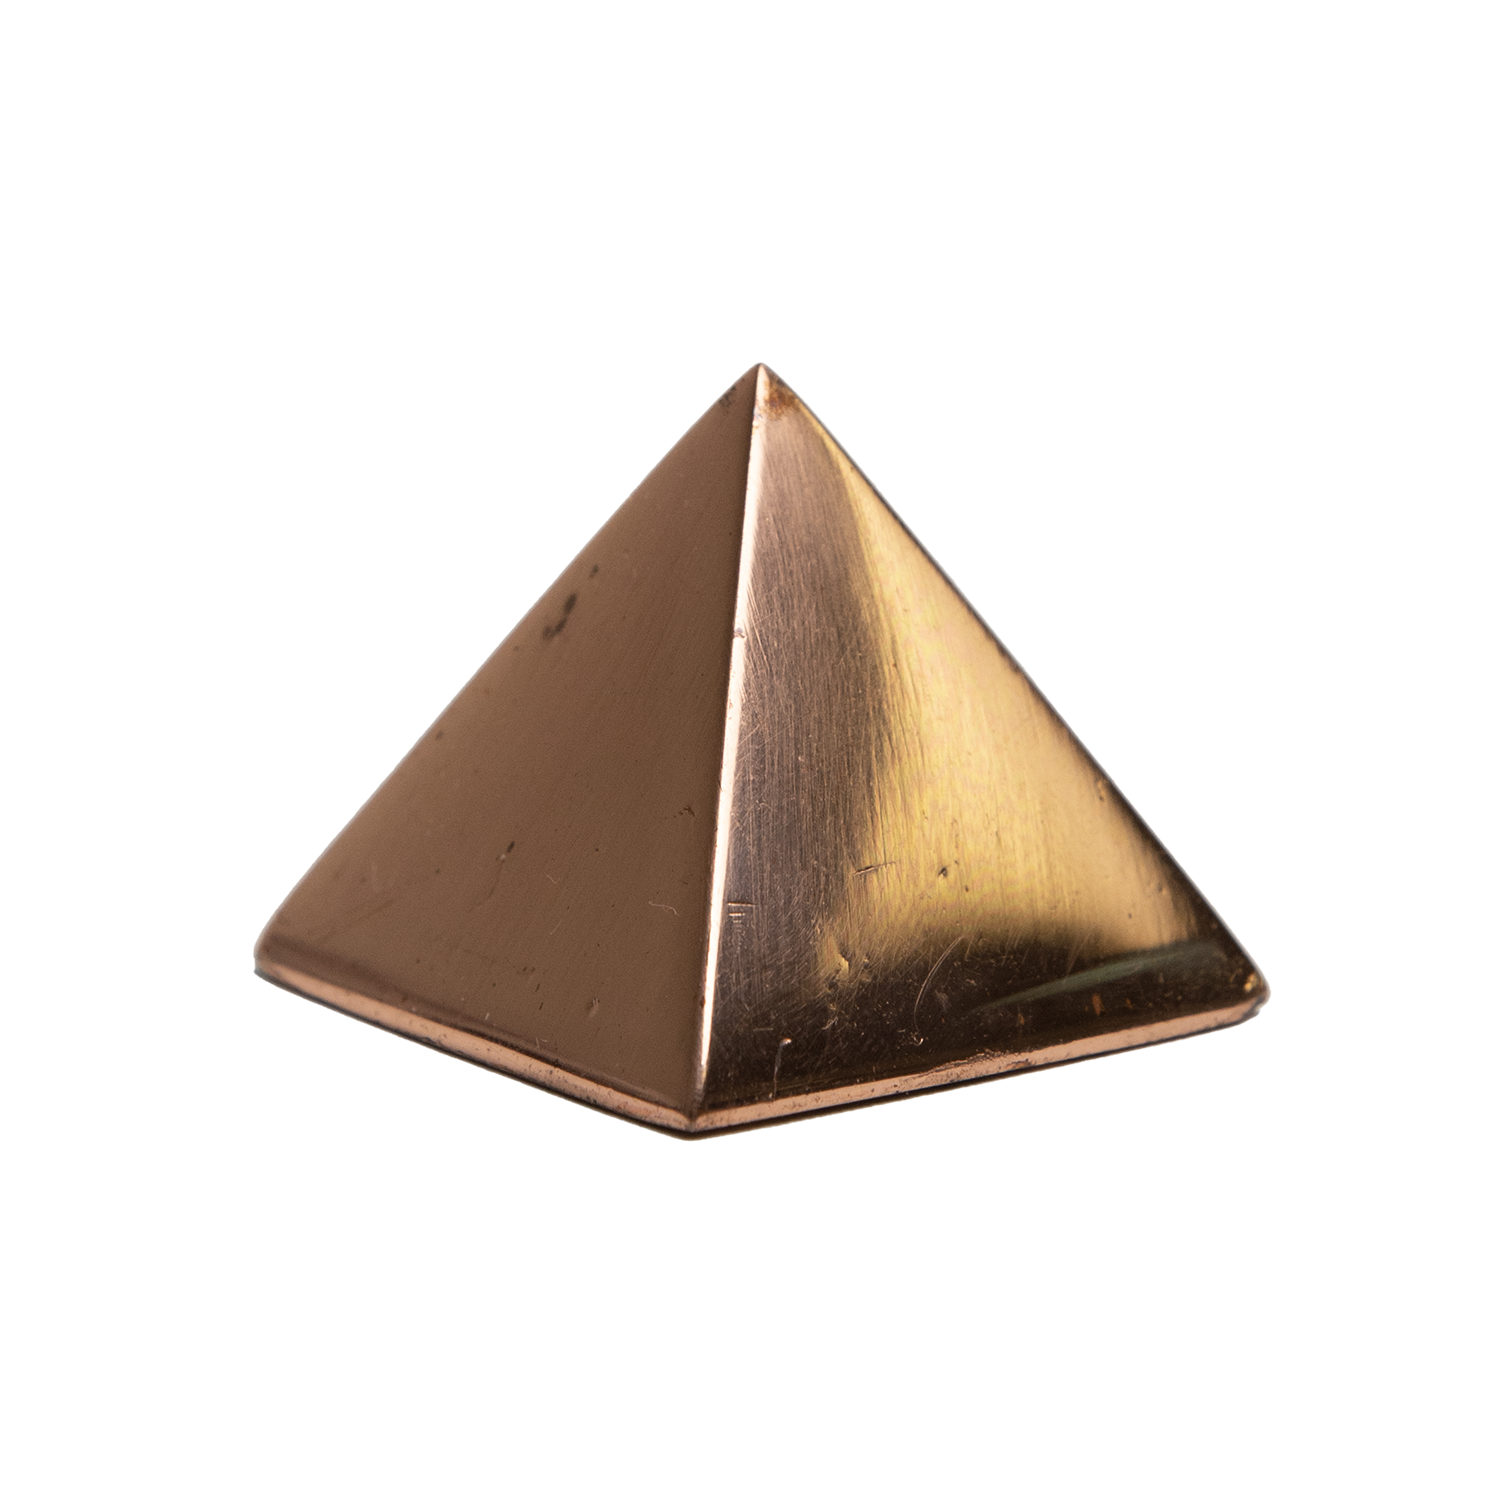 Electroculture new 100% copper pyramid kit to build up to 3 m or 9